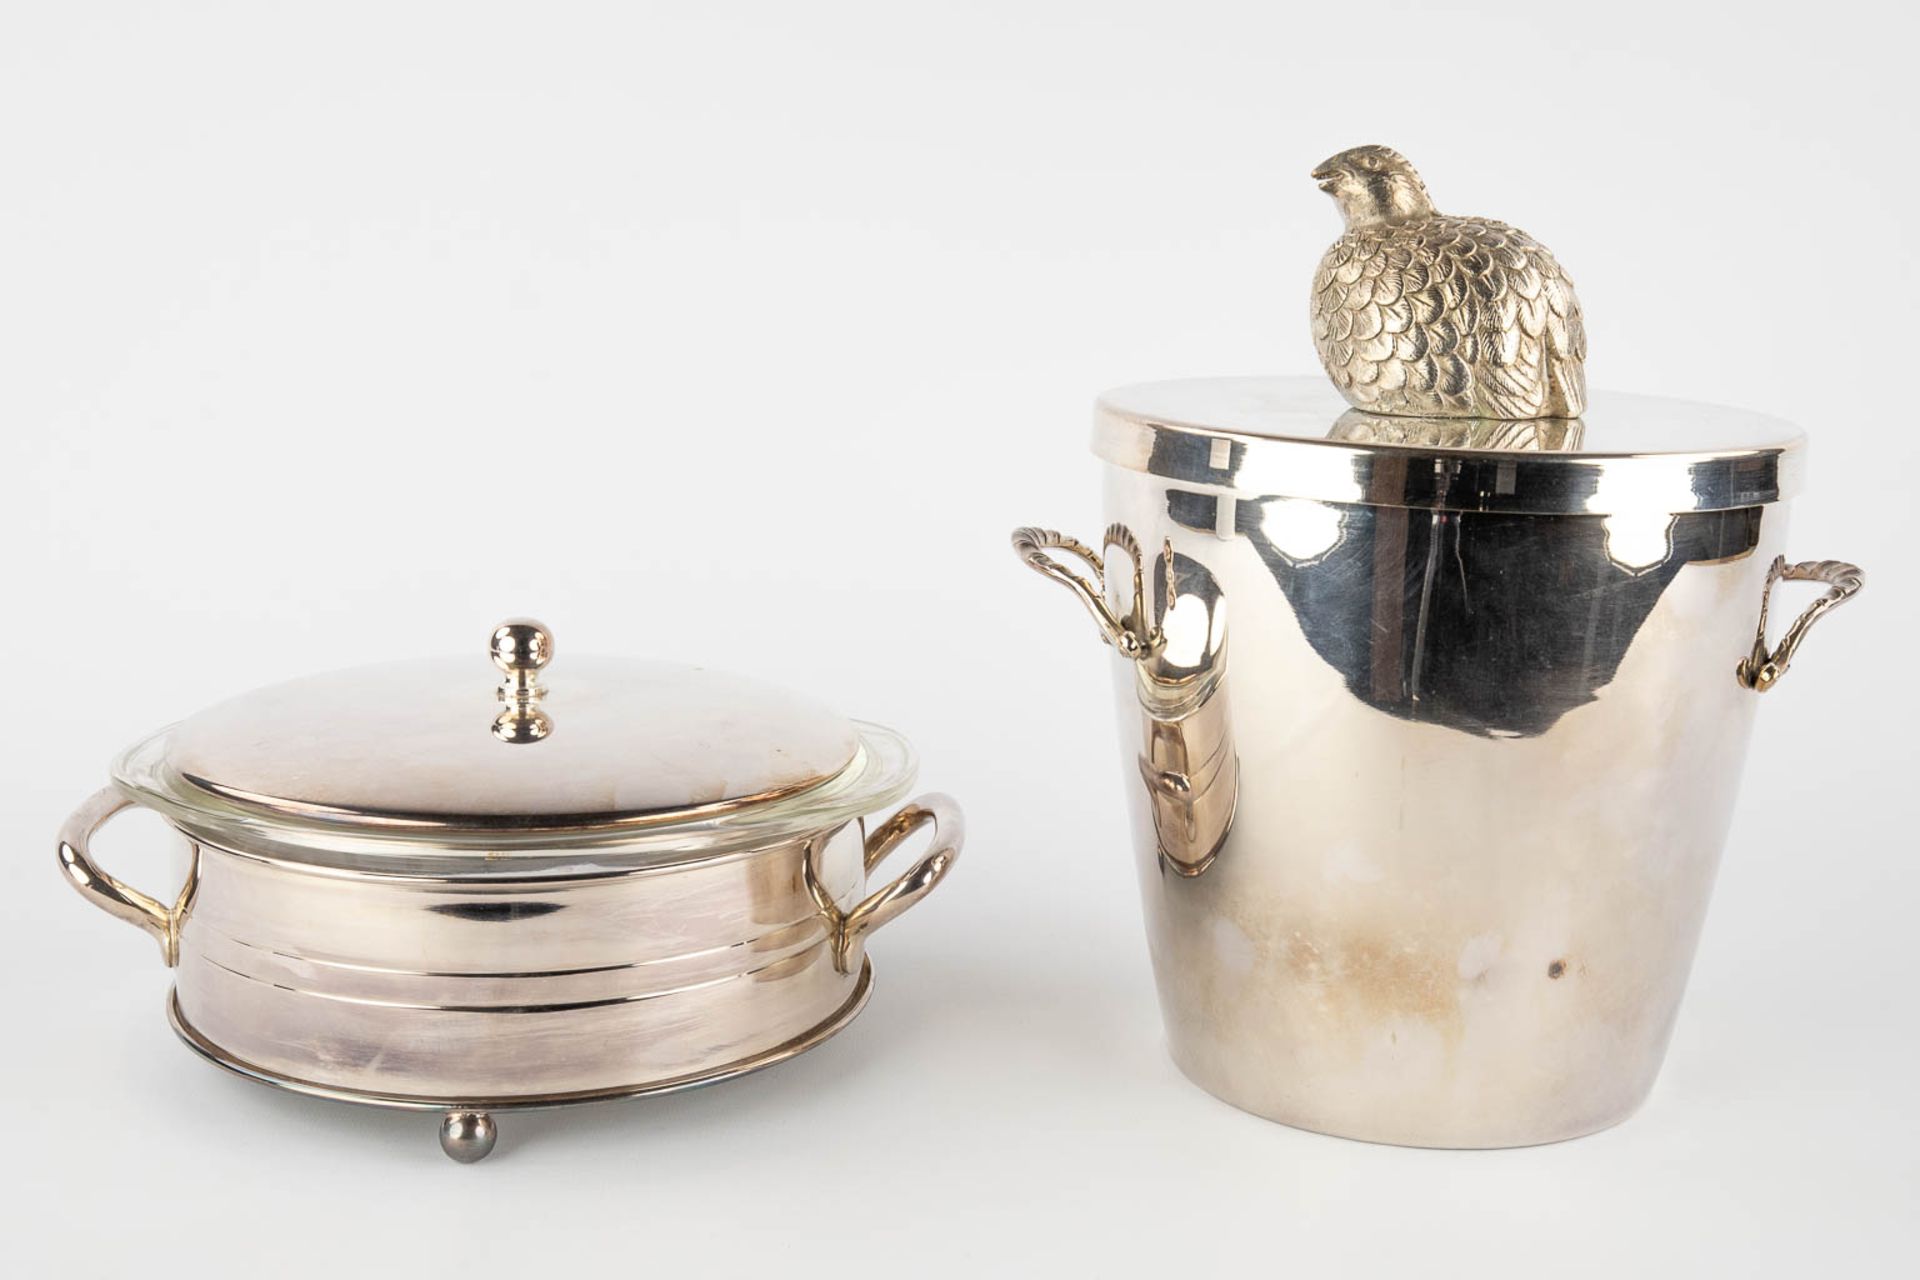 Four silver-plated storage boxes, ice-pails. (H:27 x D:20 cm) - Image 5 of 20